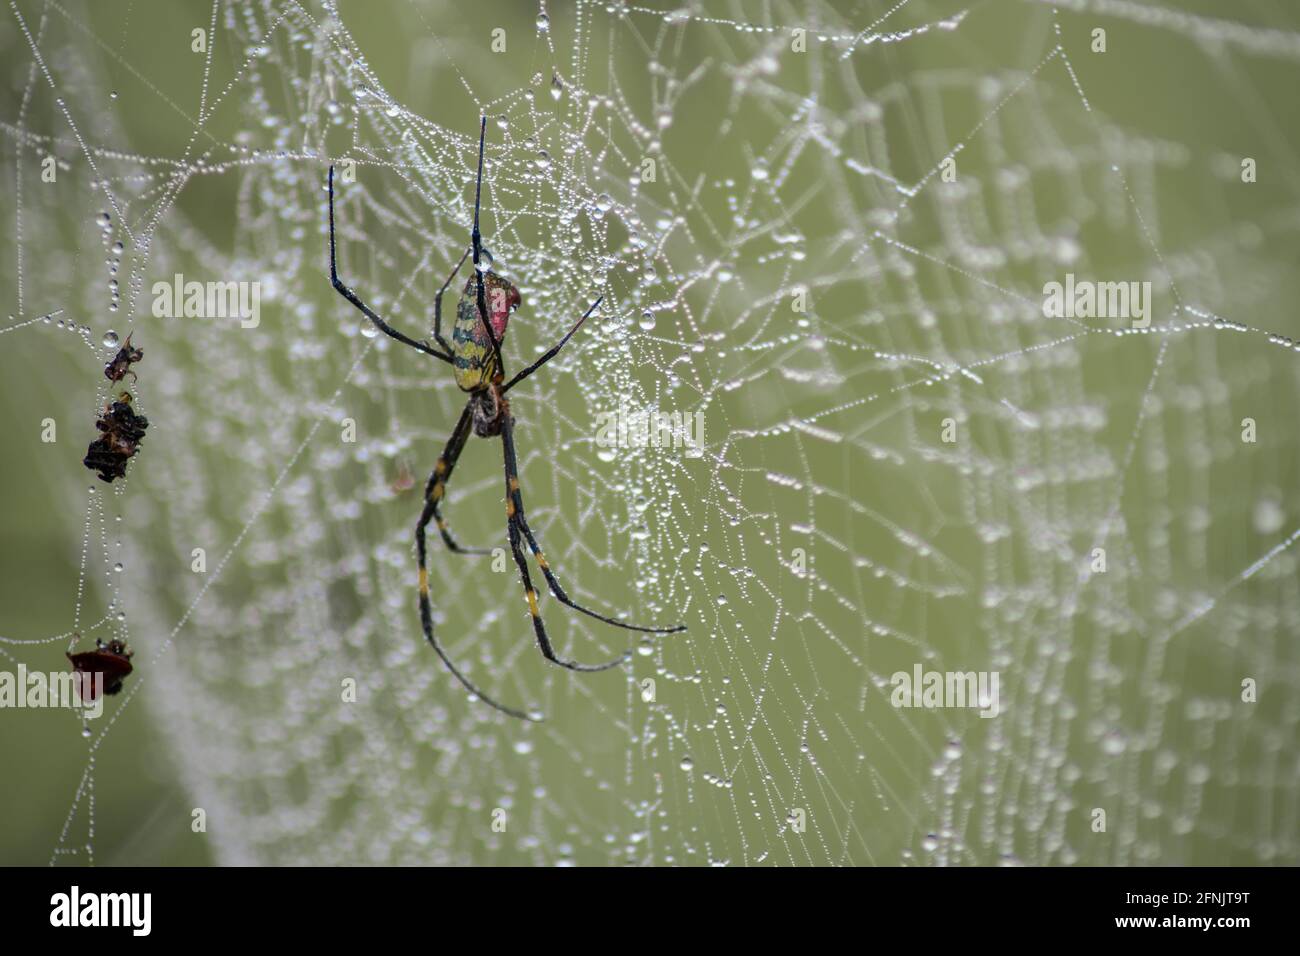 Close up of a spider in its spider web in the forest with dew rain drops on its long legs, Shan state, Myanmar Stock Photo